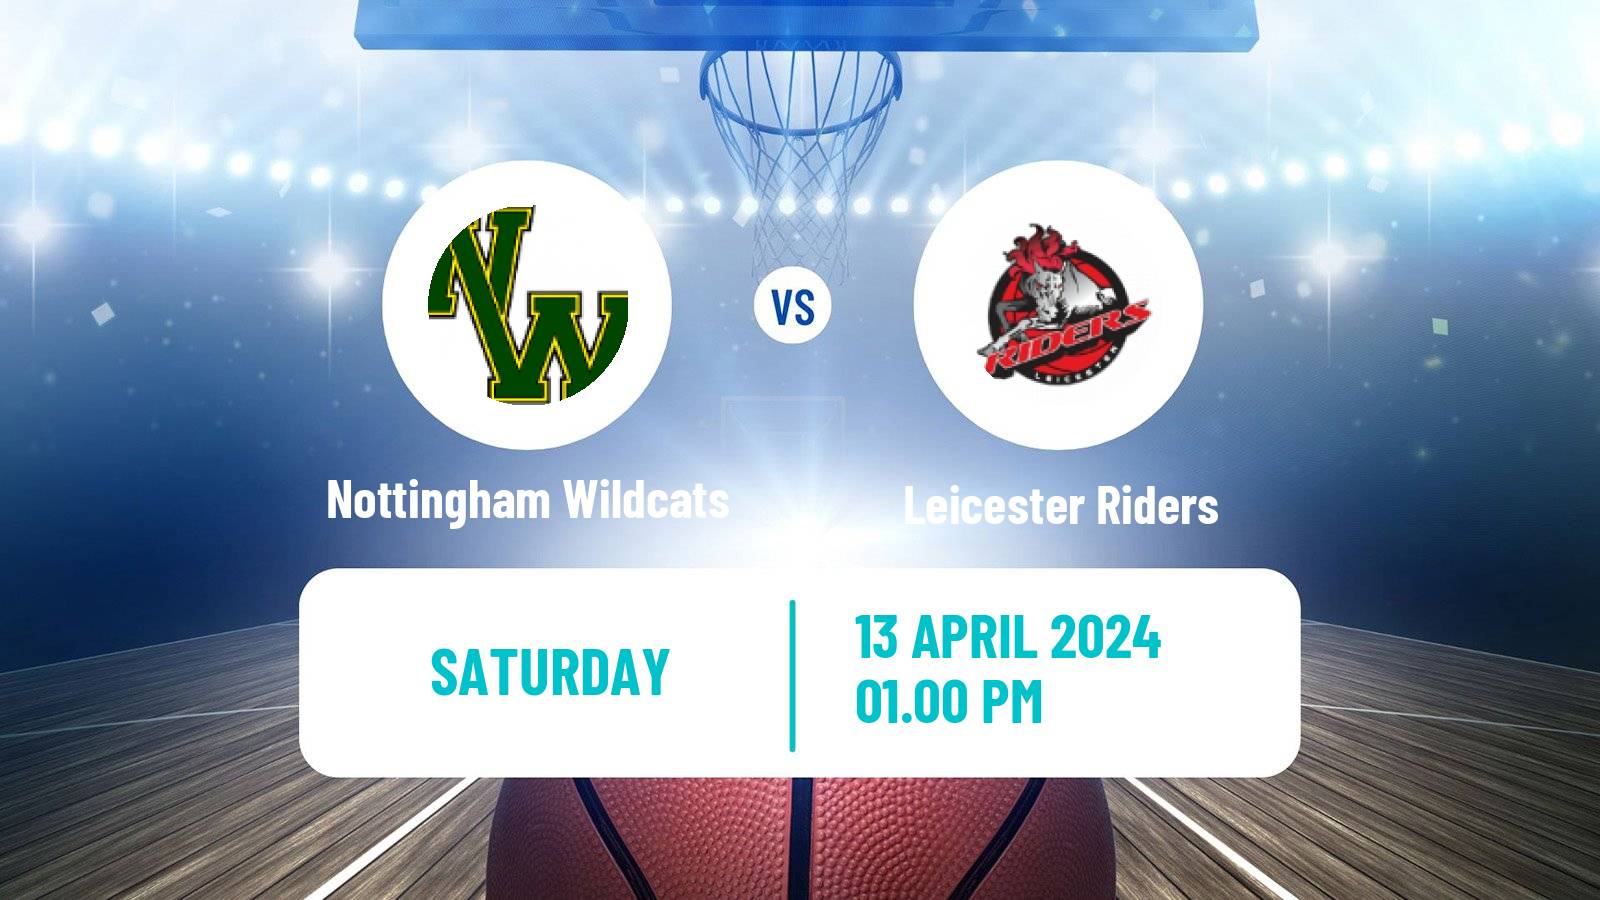 Basketball British WBBL Nottingham Wildcats - Leicester Riders